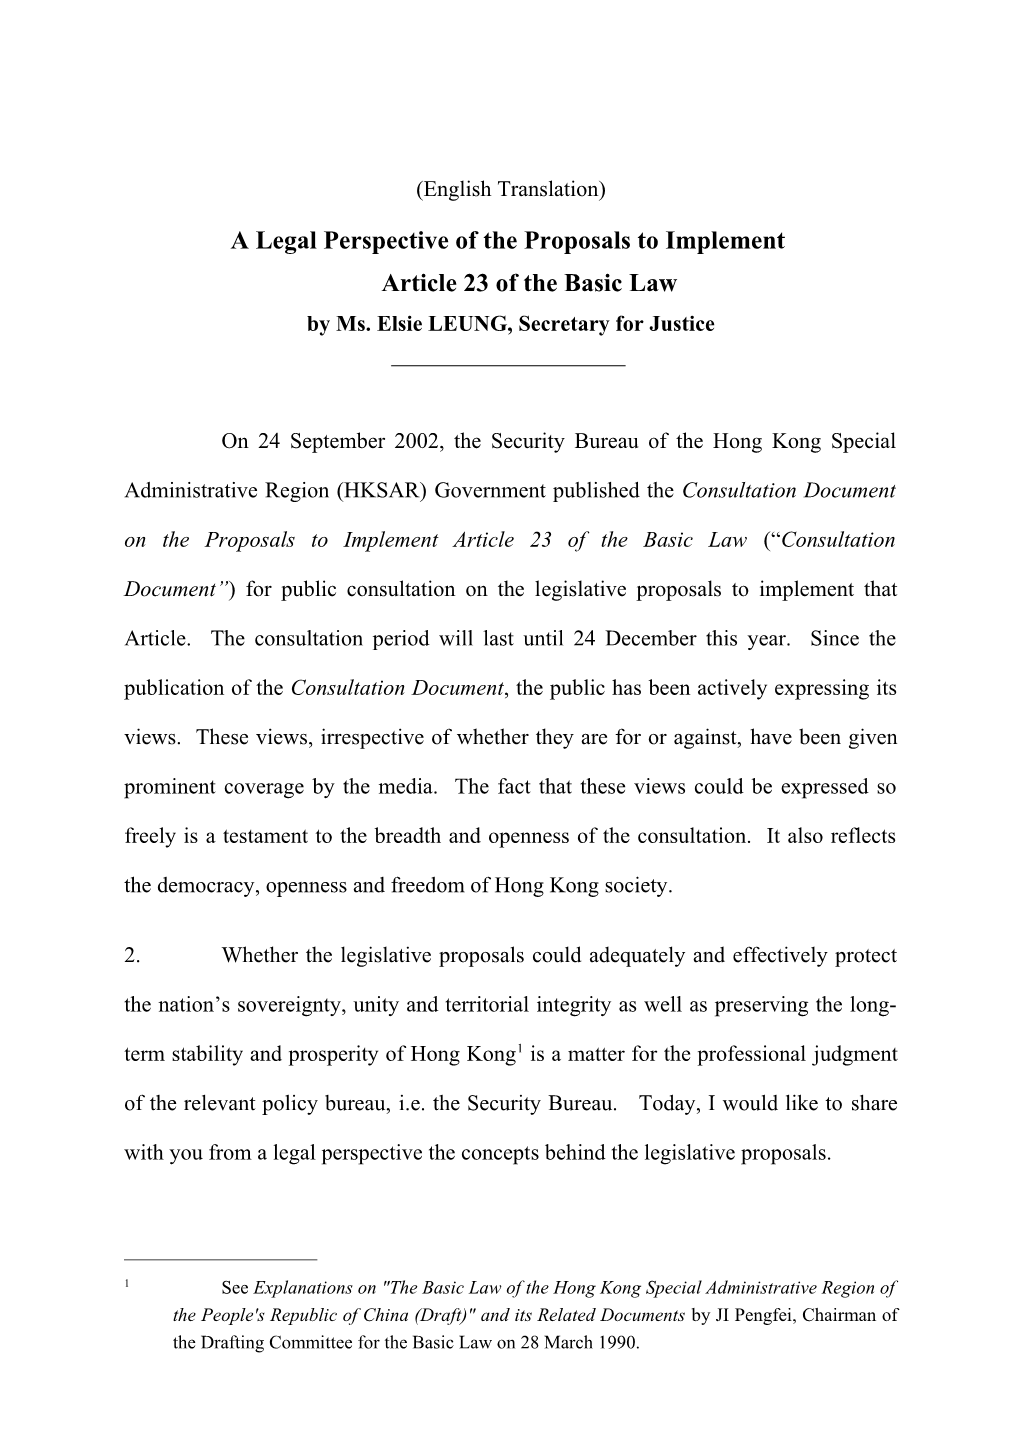 A Legal Perspective of the Proposals to Implementarticle 23 of the Basic Law